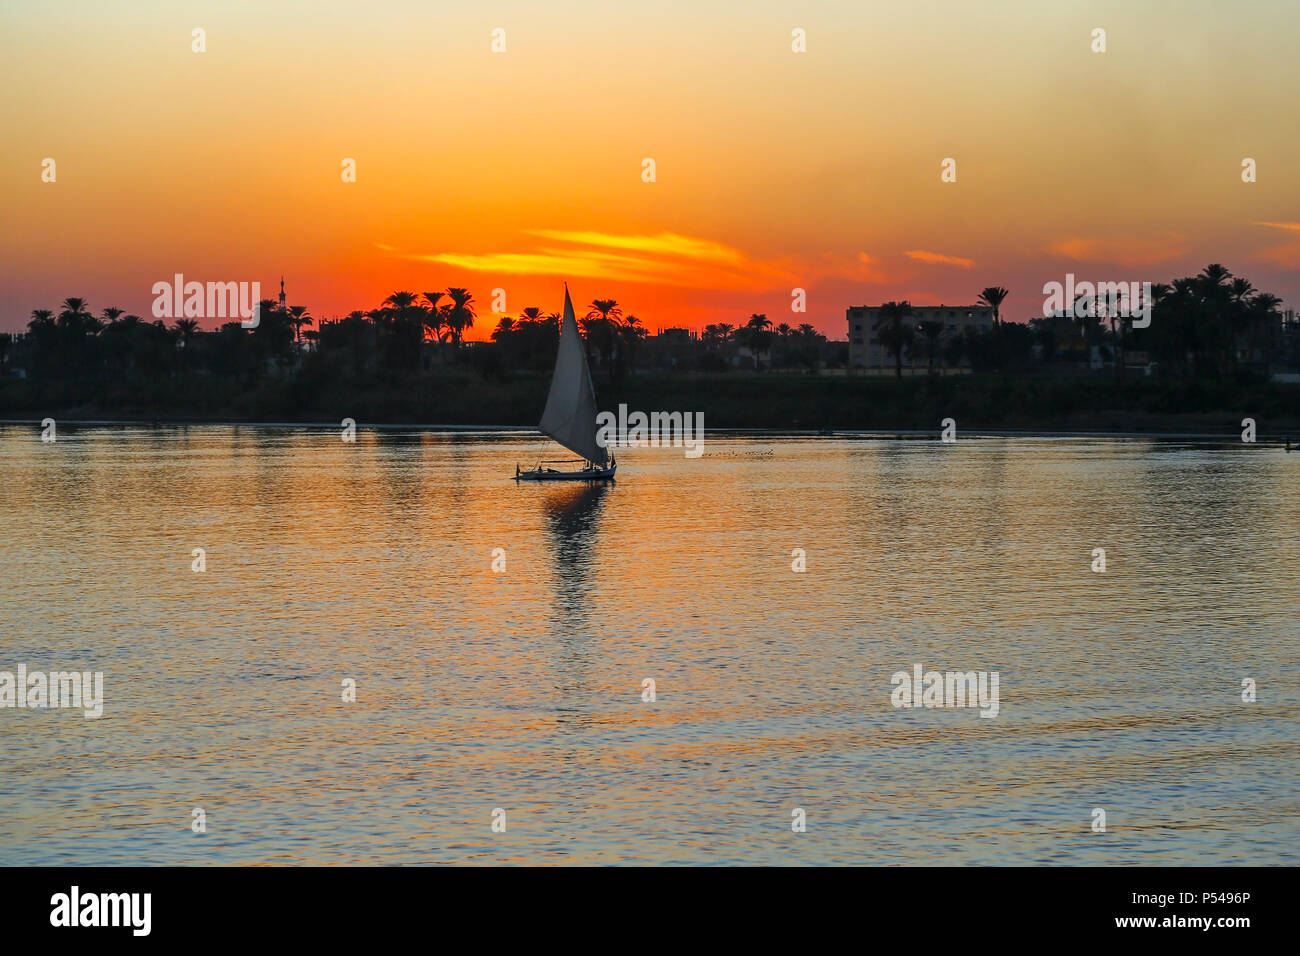 Sunset on the Nile River with Felucca boat sailing, Luxor, Egypt, Africa Stock Photo